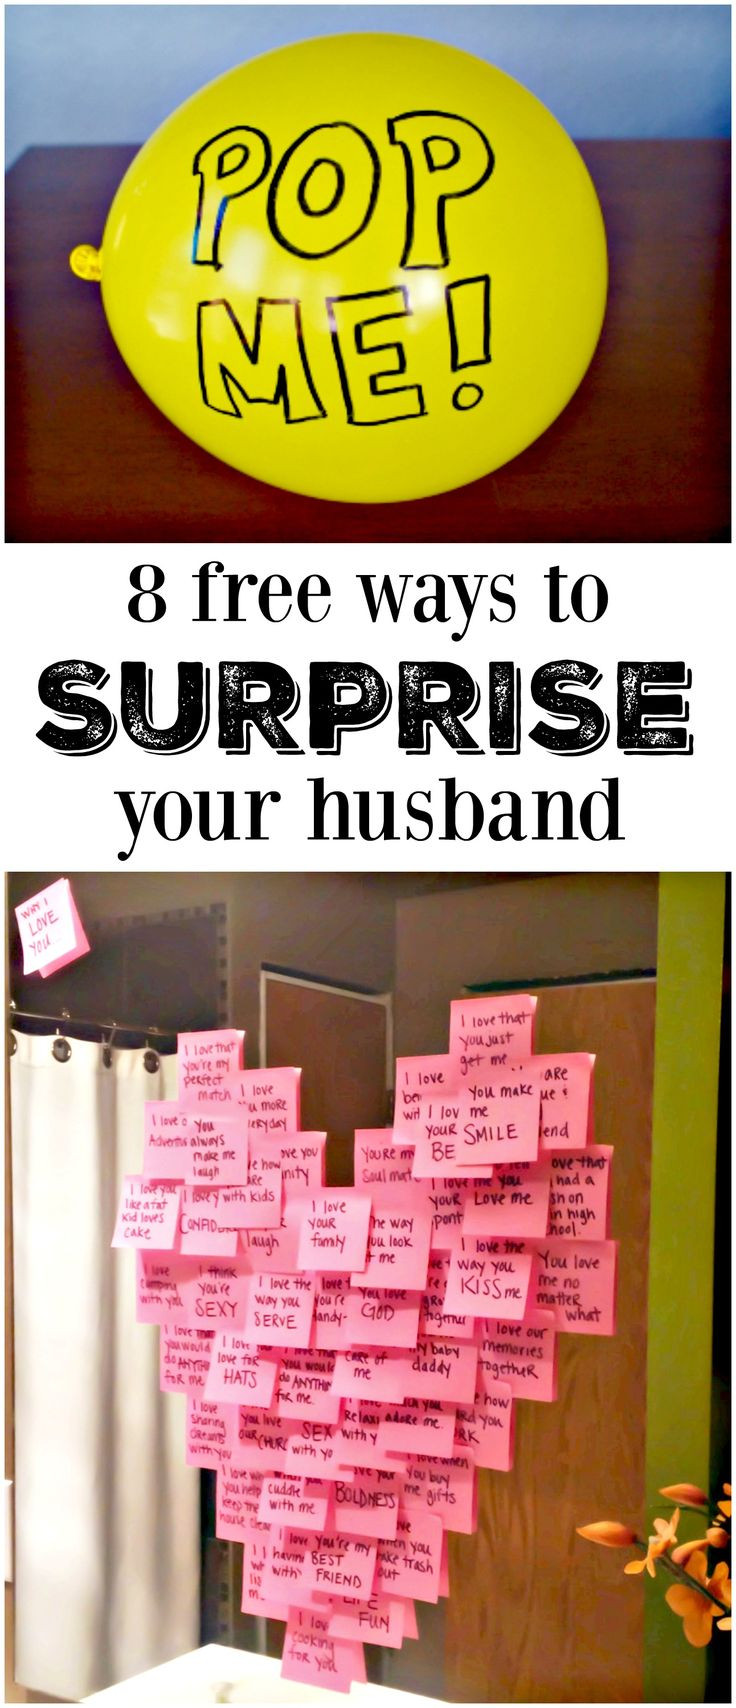 Valentines Day Ideas For Husband
 8 Meaningful Ways to Make His Day